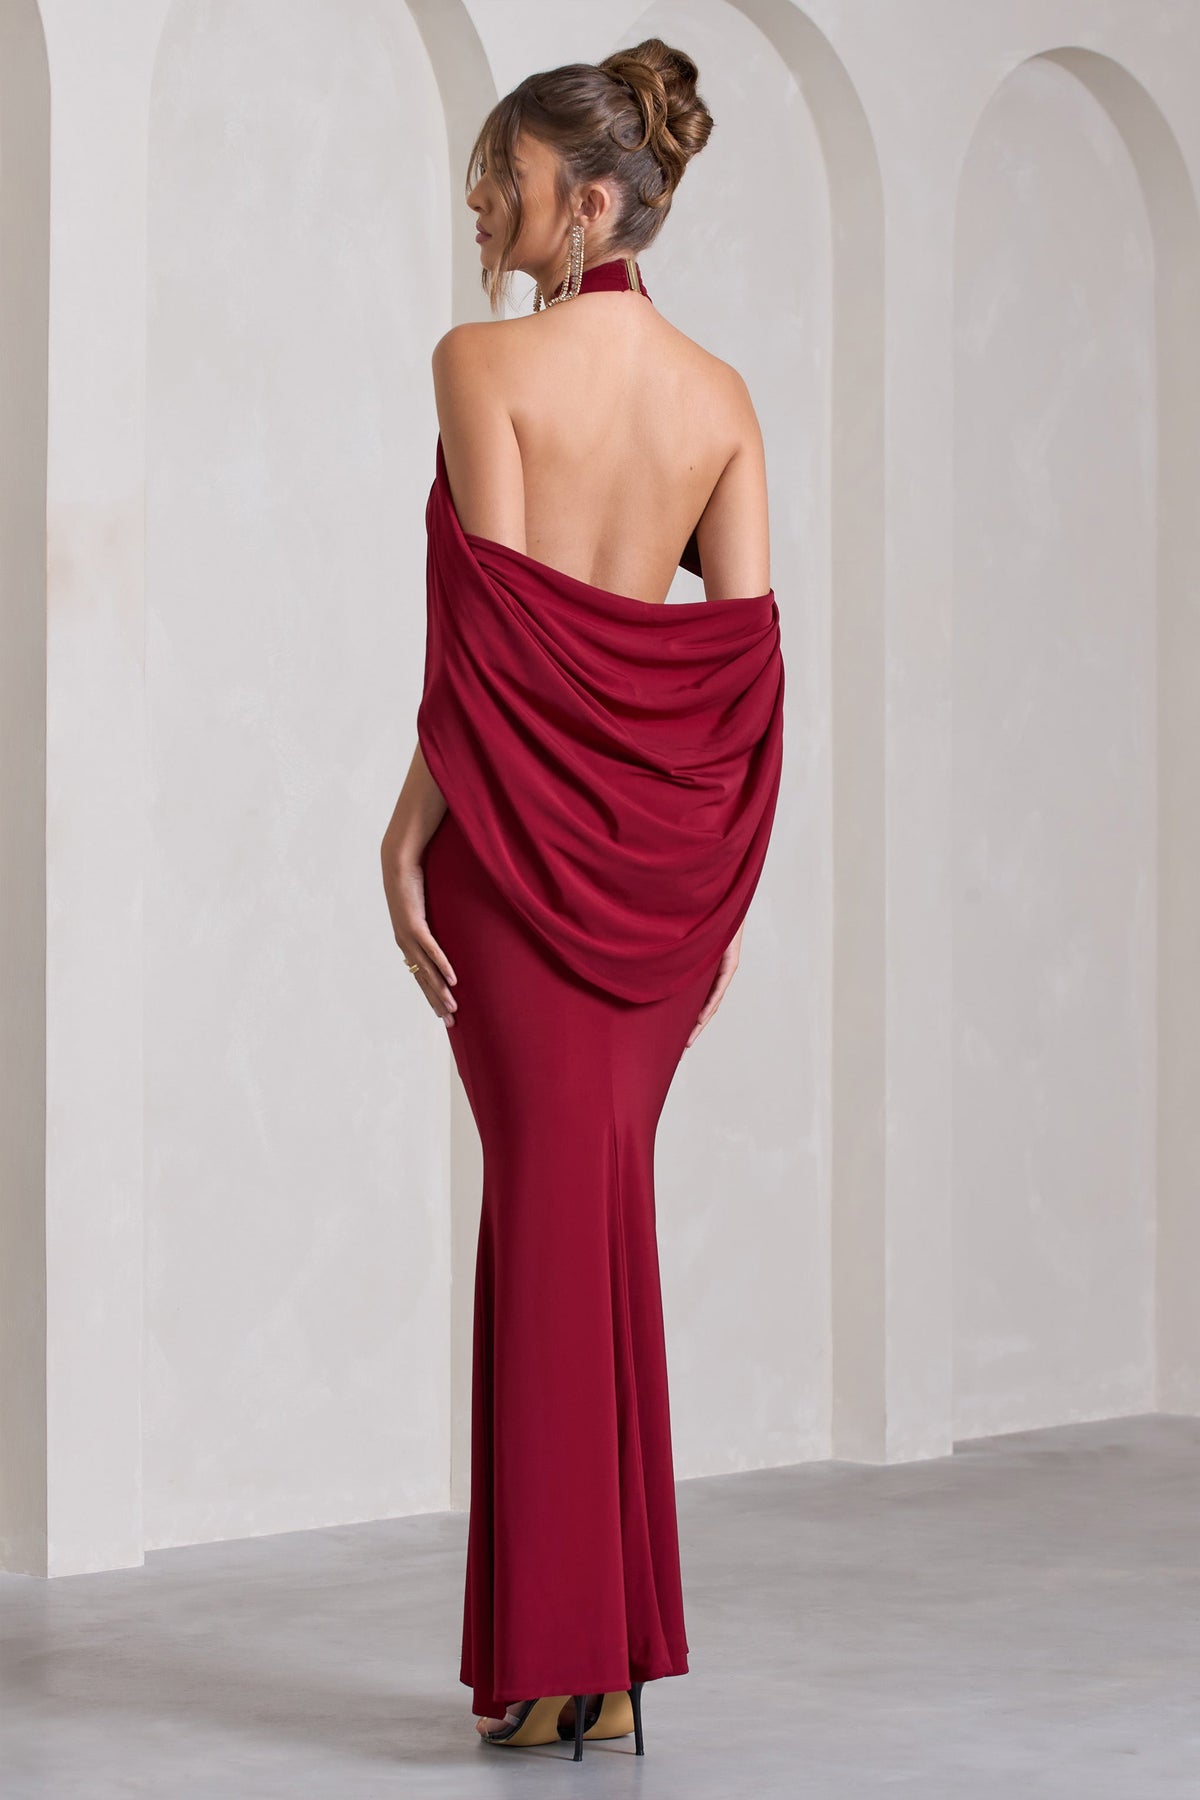 Revelation Berry Red Dress L Cape USA Maxi With – - Club Crossed London Halter-Neck Fishtail